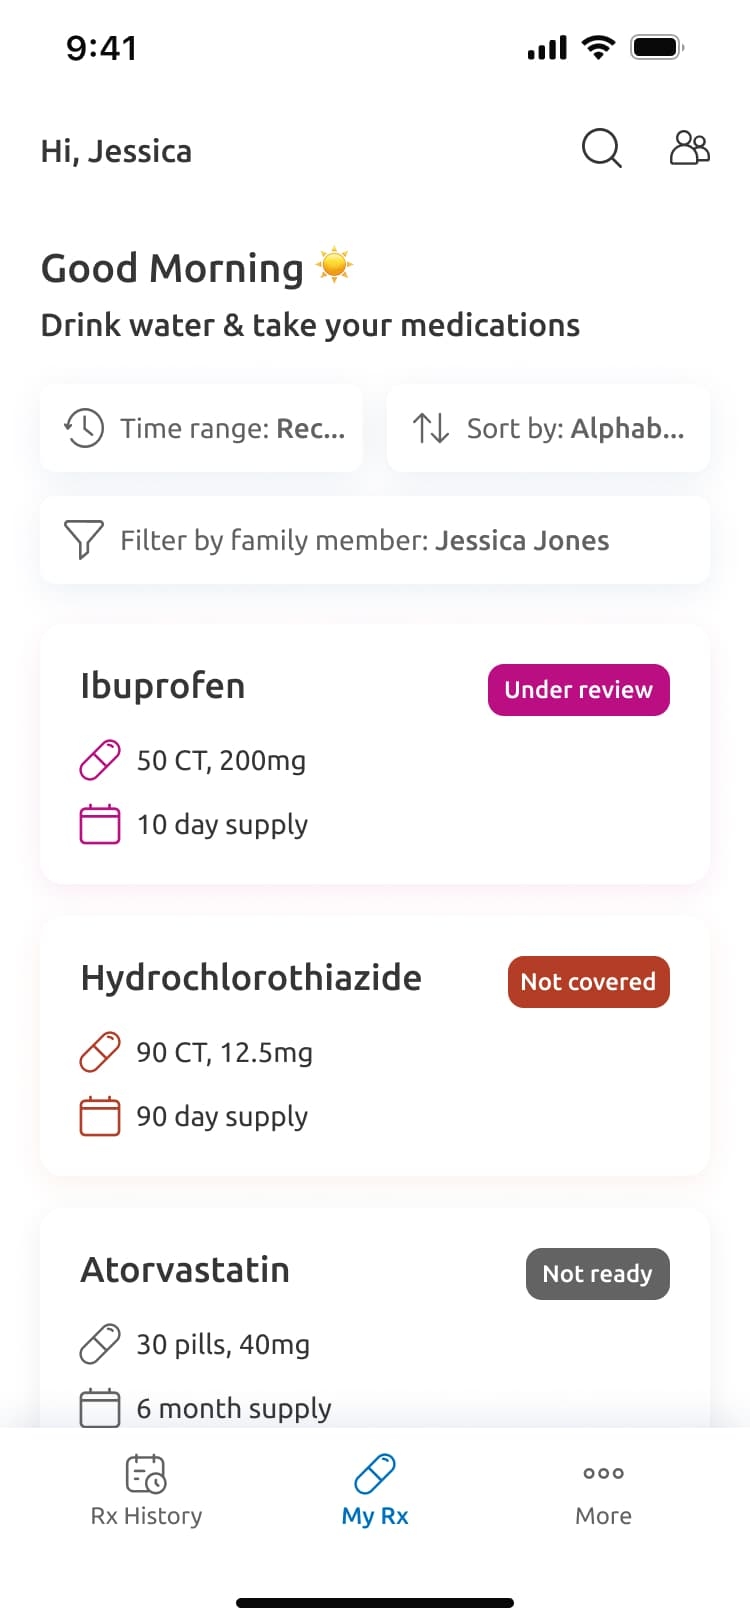 A mobile screen showing the Magellan app with reminders for three medicines: Ibuprofen, Hydrochlorothiazide, and Atorvastatin. Each medication is listed with dosage and supply details.